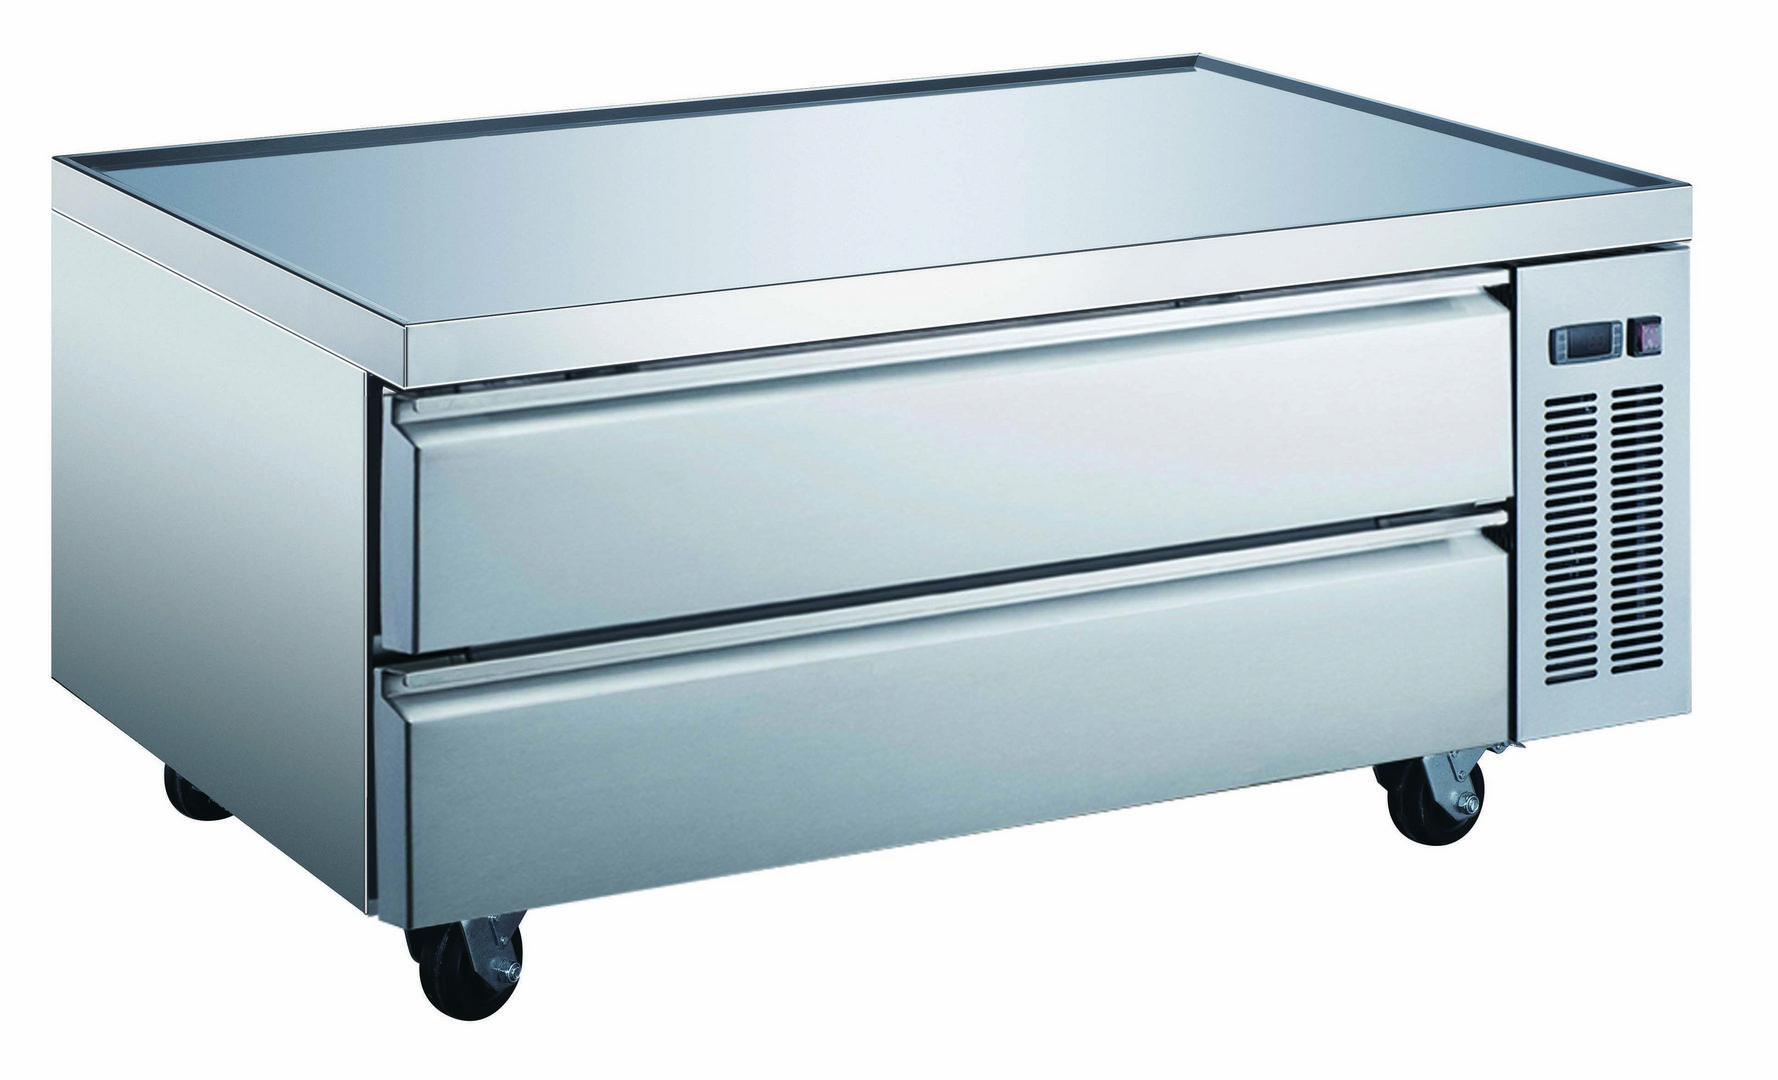 A stainless steel drawer on wheels.